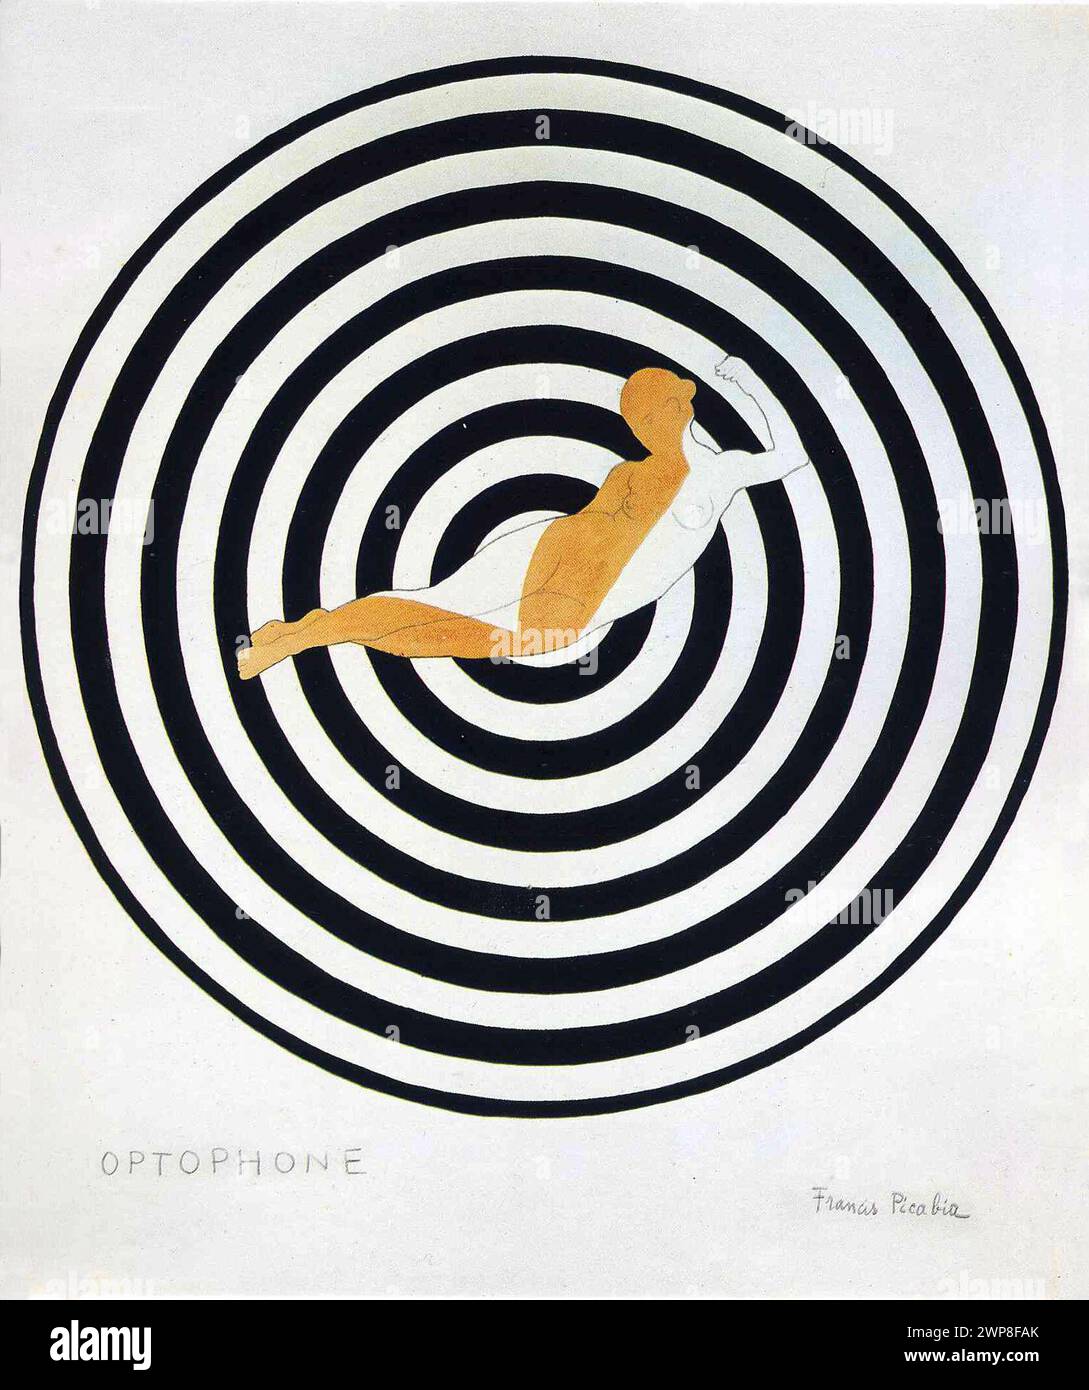 Octophone, art work by French artist Francis Picabia.  circa 1922.  Original work is  ink, watercolor and pencil on board Stock Photo